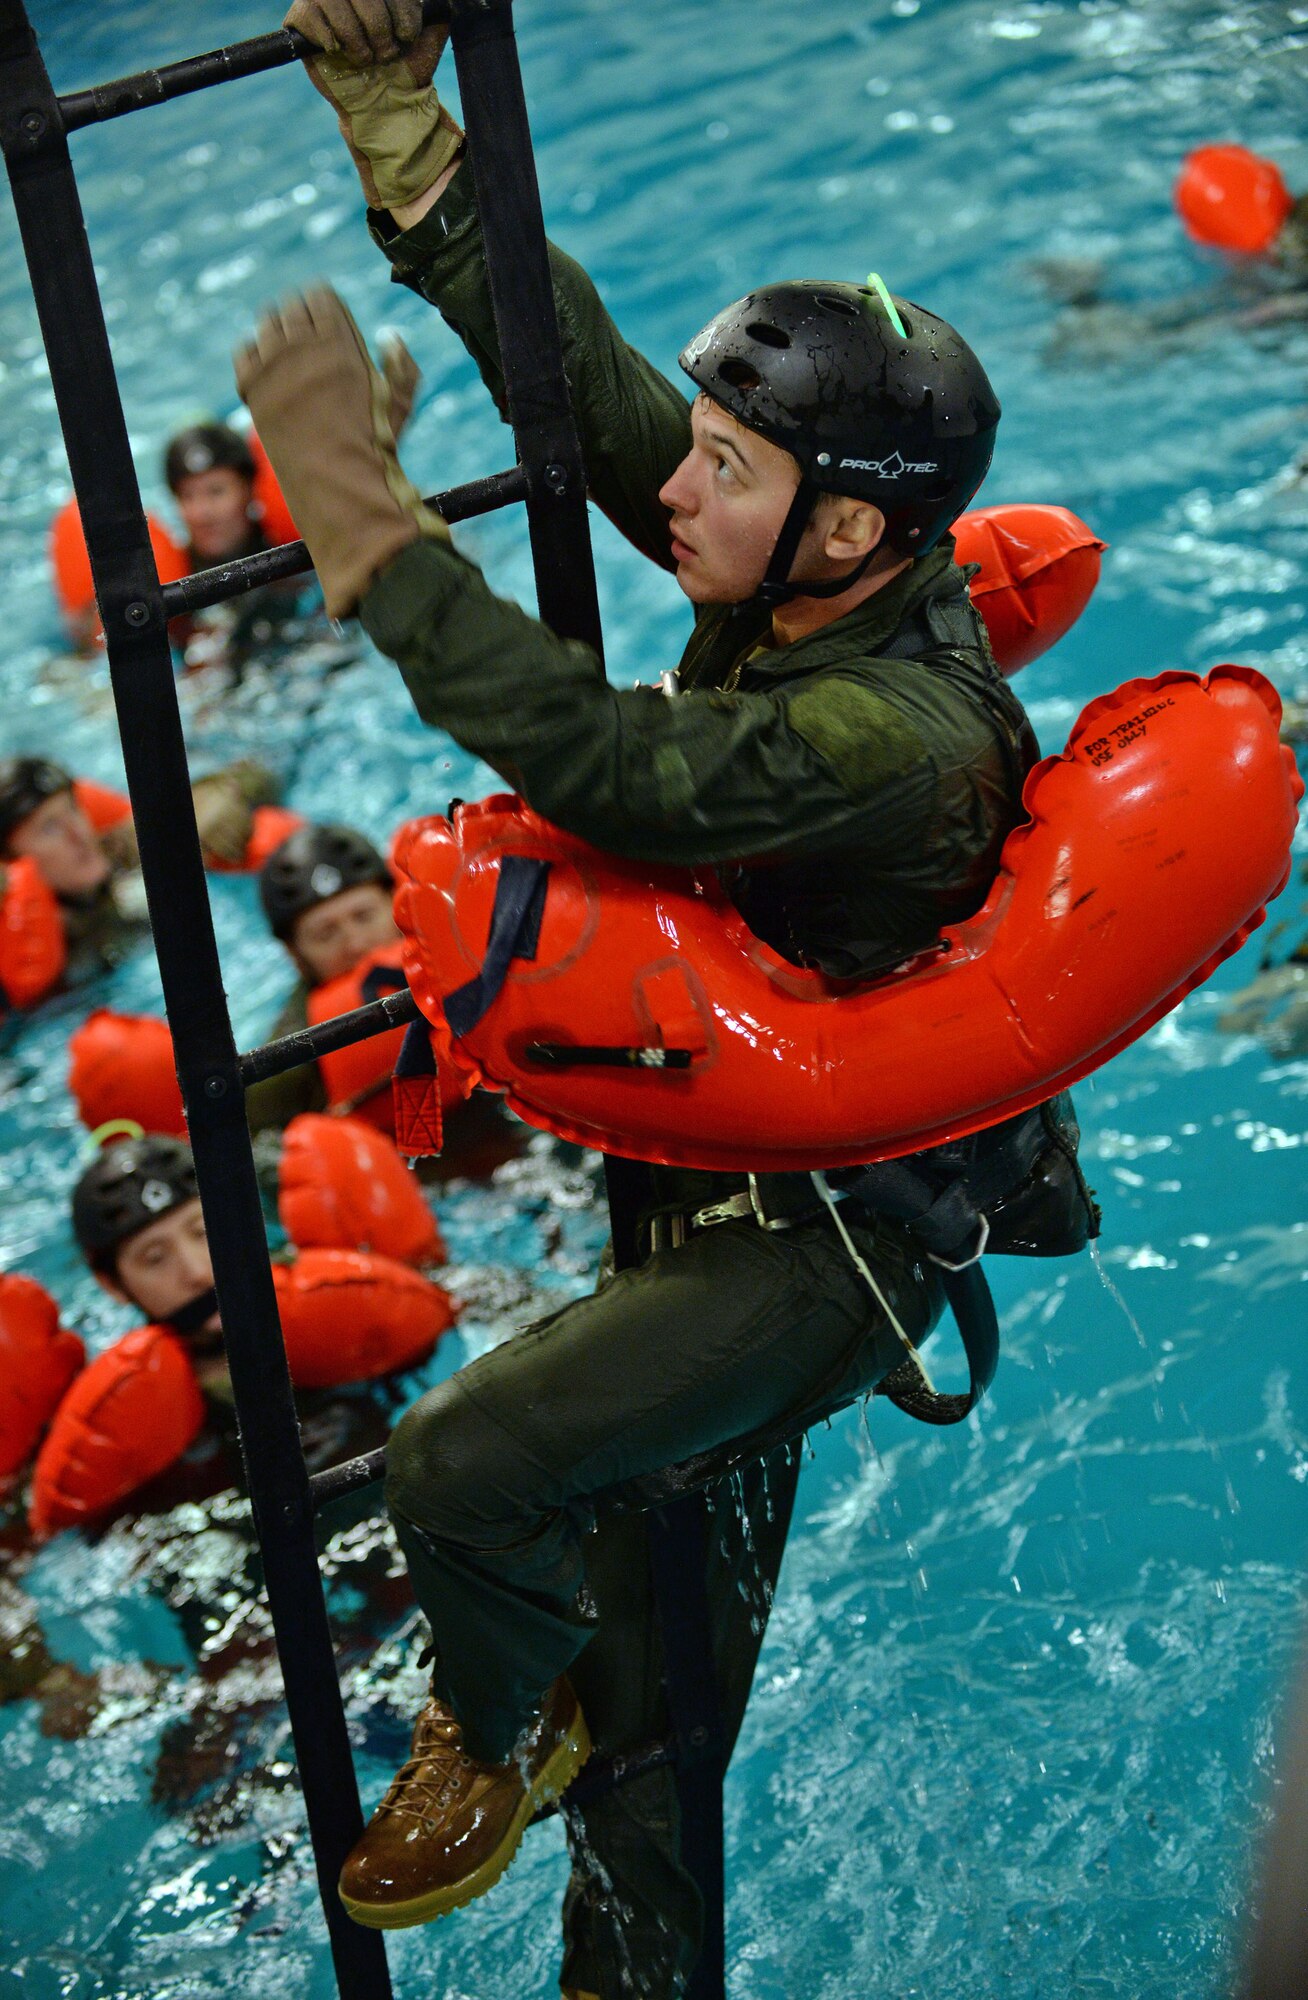 A U.S. Air Force Air Commando from the 352nd Special Operation Wing, climbs a ladder during Survival, Evasion, Resistance and Escape Water Survival Training March 10, 2017, at Lowestoft College, Maritime and Offshore Facilities, England. Climbing the ladder simulated what it would be like to climb into an aircraft if stuck in the middle of the ocean. (U.S. Air Force photo by Senior Airman Christine Halan)